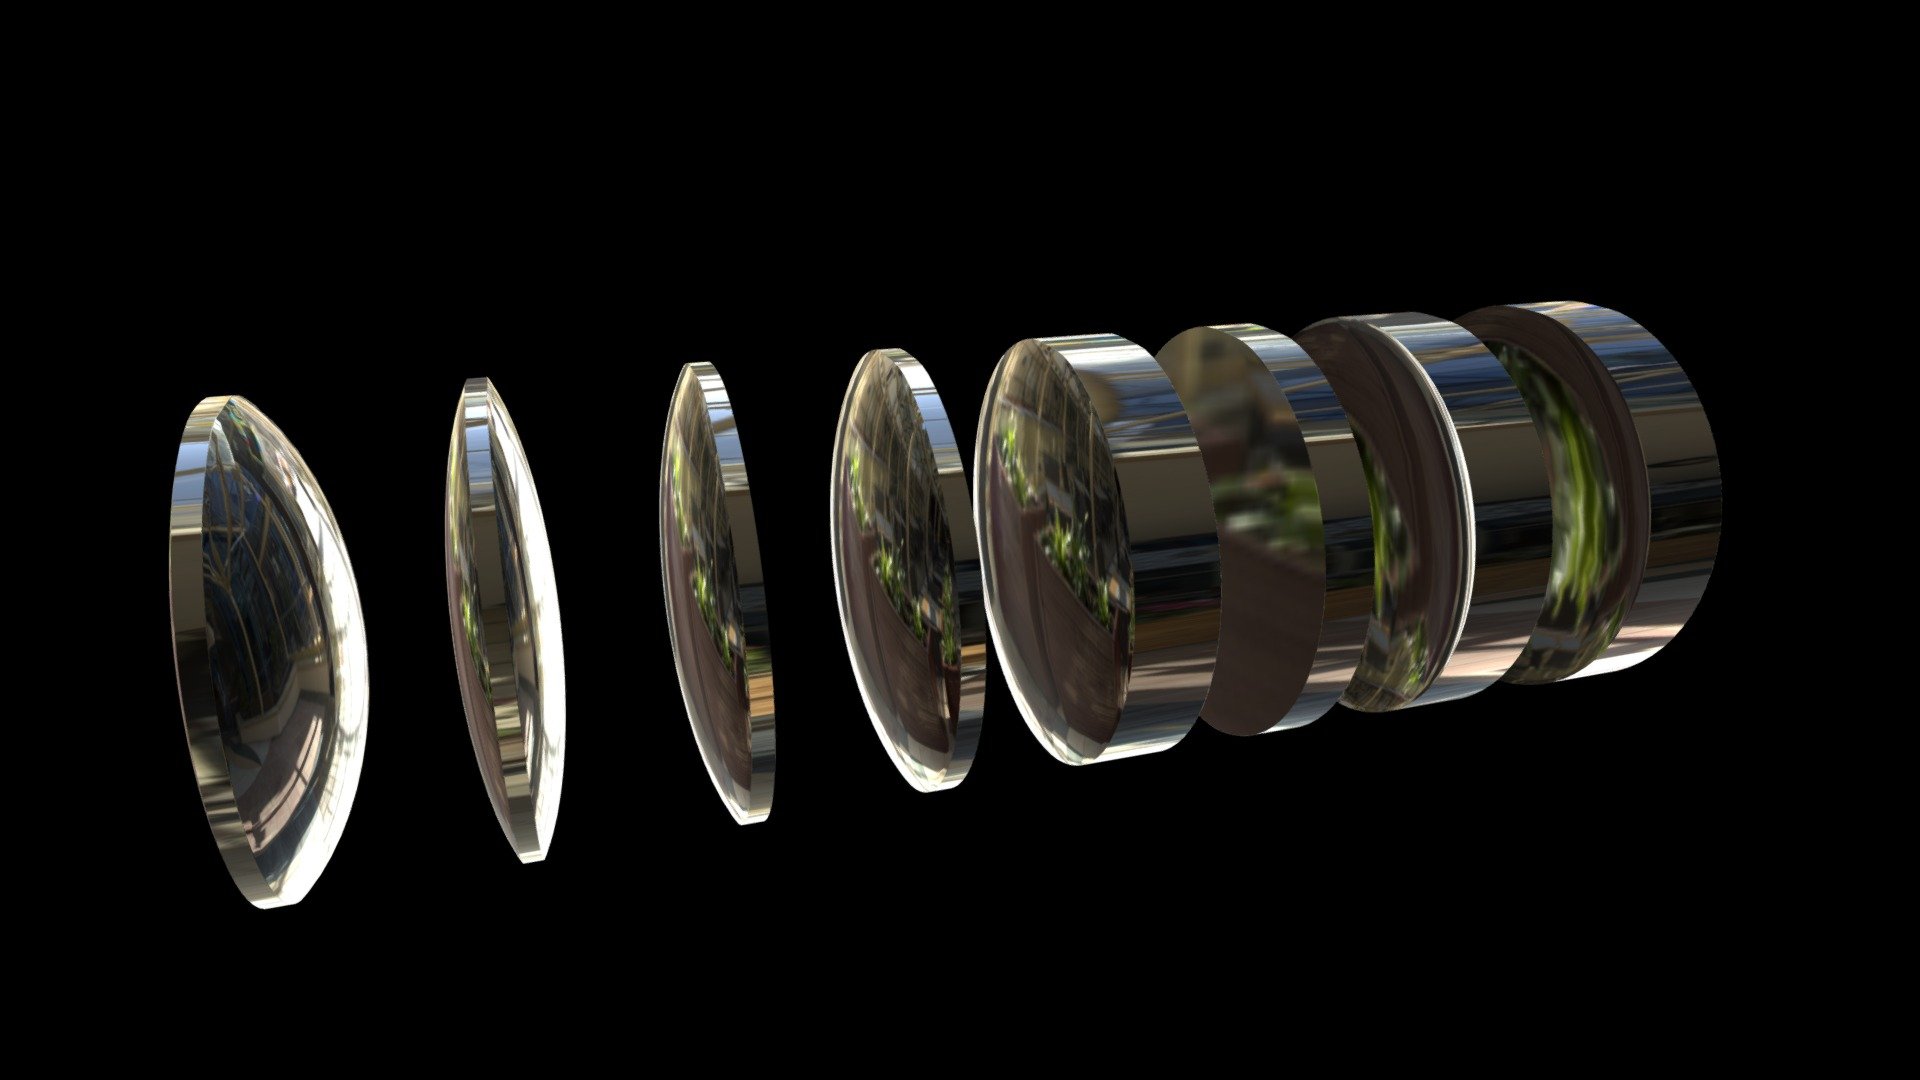 === The following description refers to the additional ZIP package provided with this model ===

Simple optical lenses 3D Models. 8 individual objects (convex, biconvex, plano-convex, positive meniscus, negative meniscus, plano-concave, biconcave, concave), sharing the same non overlapping UV Layout map, Material and PBR Textures set. Production-ready 3D Model, with PBR materials, textures, non overlapping UV Layout map provided in the package.

Quads only geometries (no tris/ngons).

Formats included: FBX, OBJ; scenes: BLEND (with Cycles / Eevee PBR Materials and Textures); other: 16-bit PNGs with Alpha.

8 Objects (meshes), 1 PBR Material, UV unwrapped (non overlapping UV Layout map provided in the package); UV-mapped Textures.

UV Layout maps and Image Textures resolutions: 2048x2048; PBR Textures made with Substance Painter.

Polygonal, QUADS ONLY (no tris/ngons); 10384 vertices, 10368 quad faces (20736 tris).

Real world dimensions; scene scale units: cm in Blender 3.3 (that is: Metric with 0.01 scale) 3d model